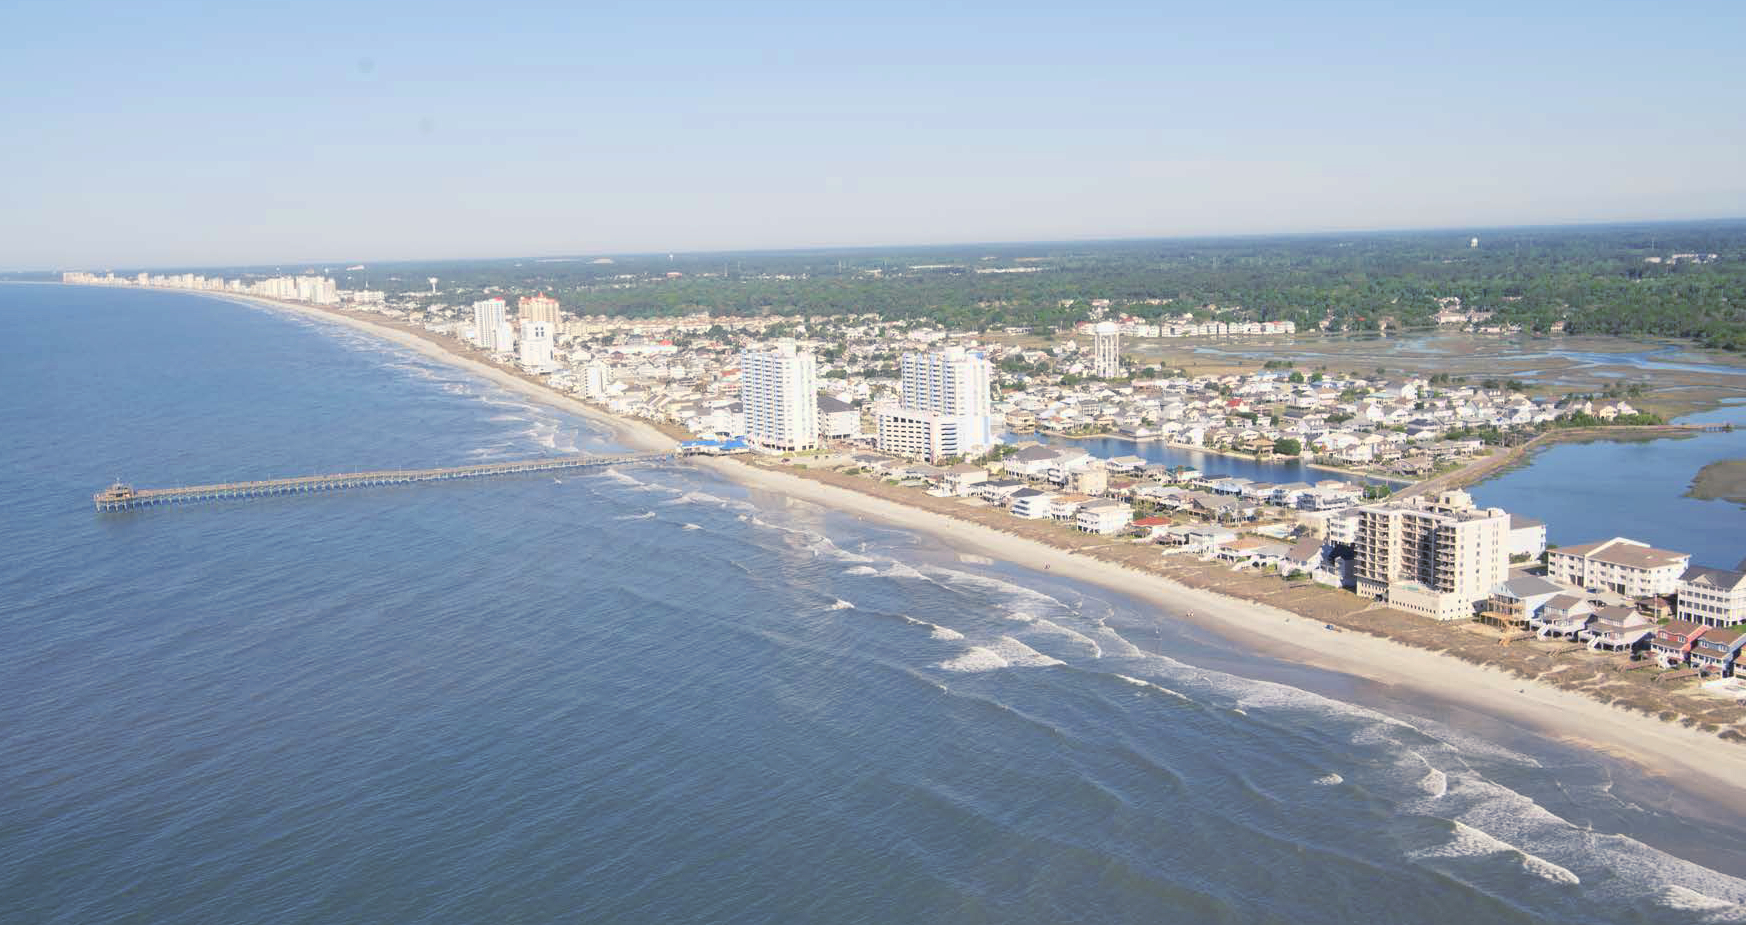 Myrtle Beach, South Carolina, Must-see Tourist Destination During The